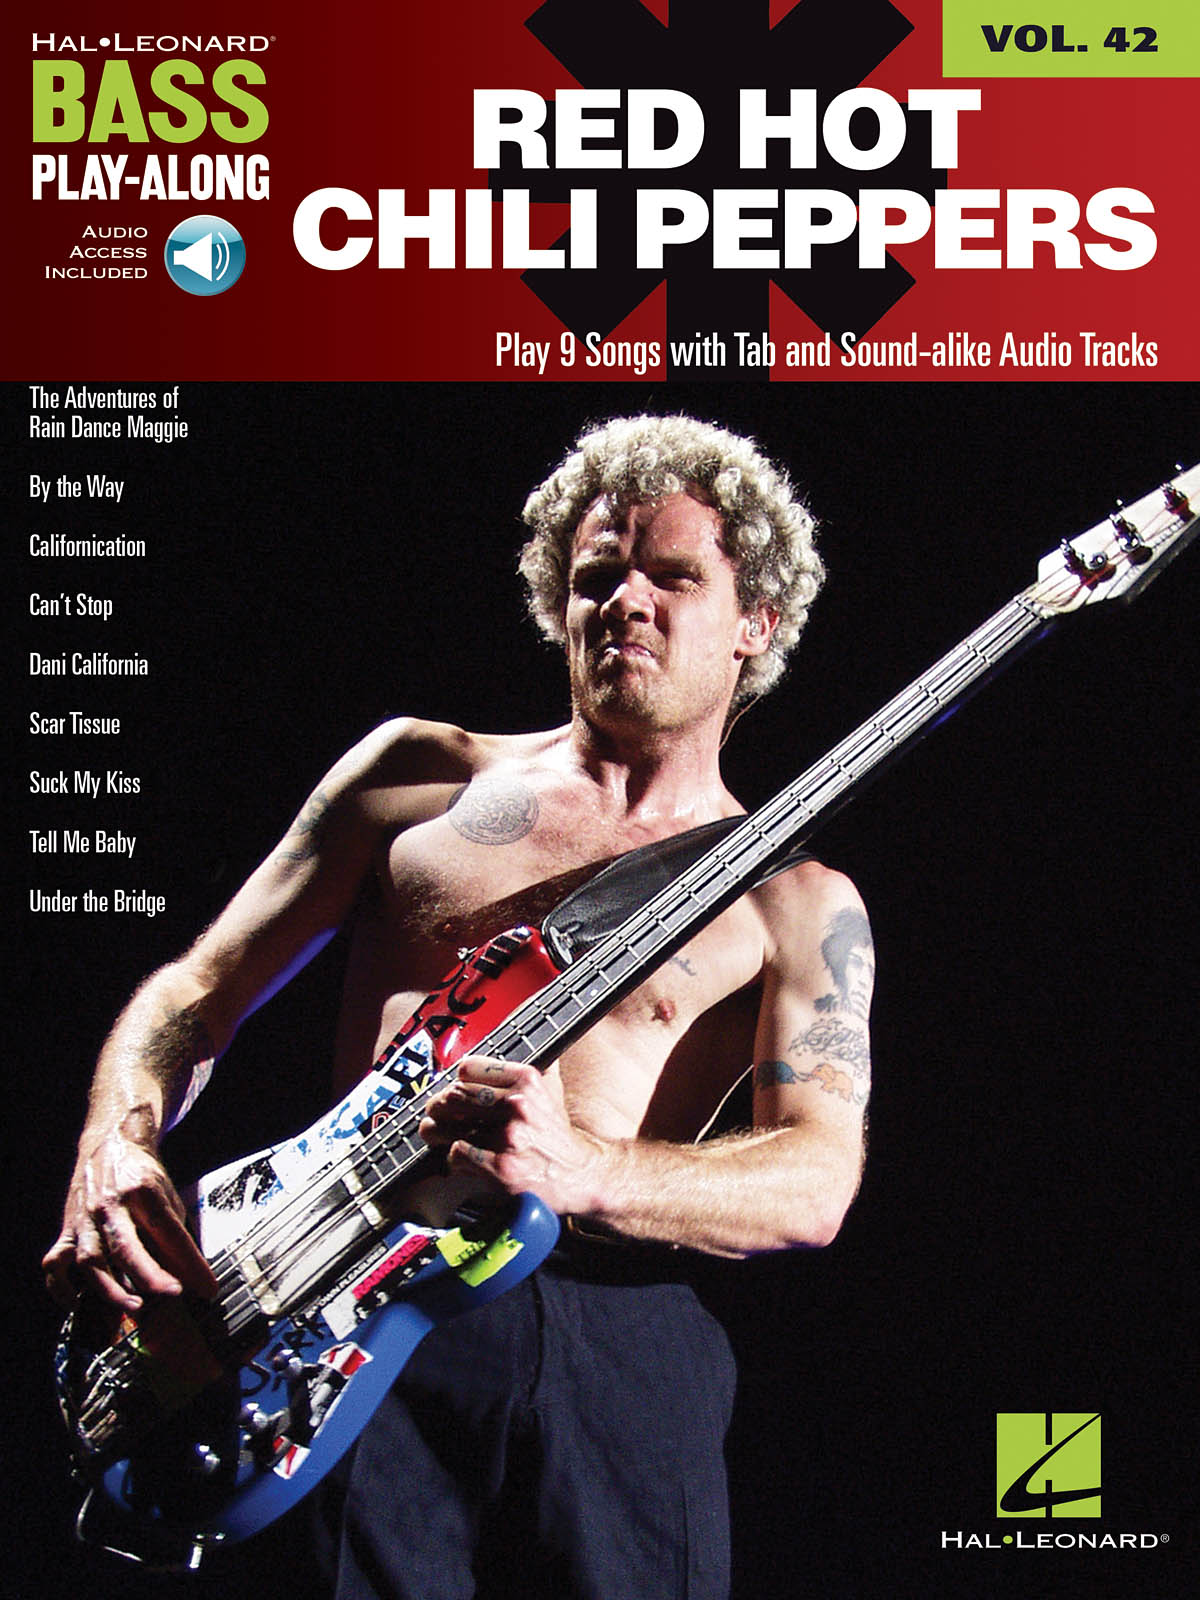 HAL LEONARD BASS PLAY ALONG VOL.42 - RED HOT CHILI PEPPERS + AUDIO ONLINE